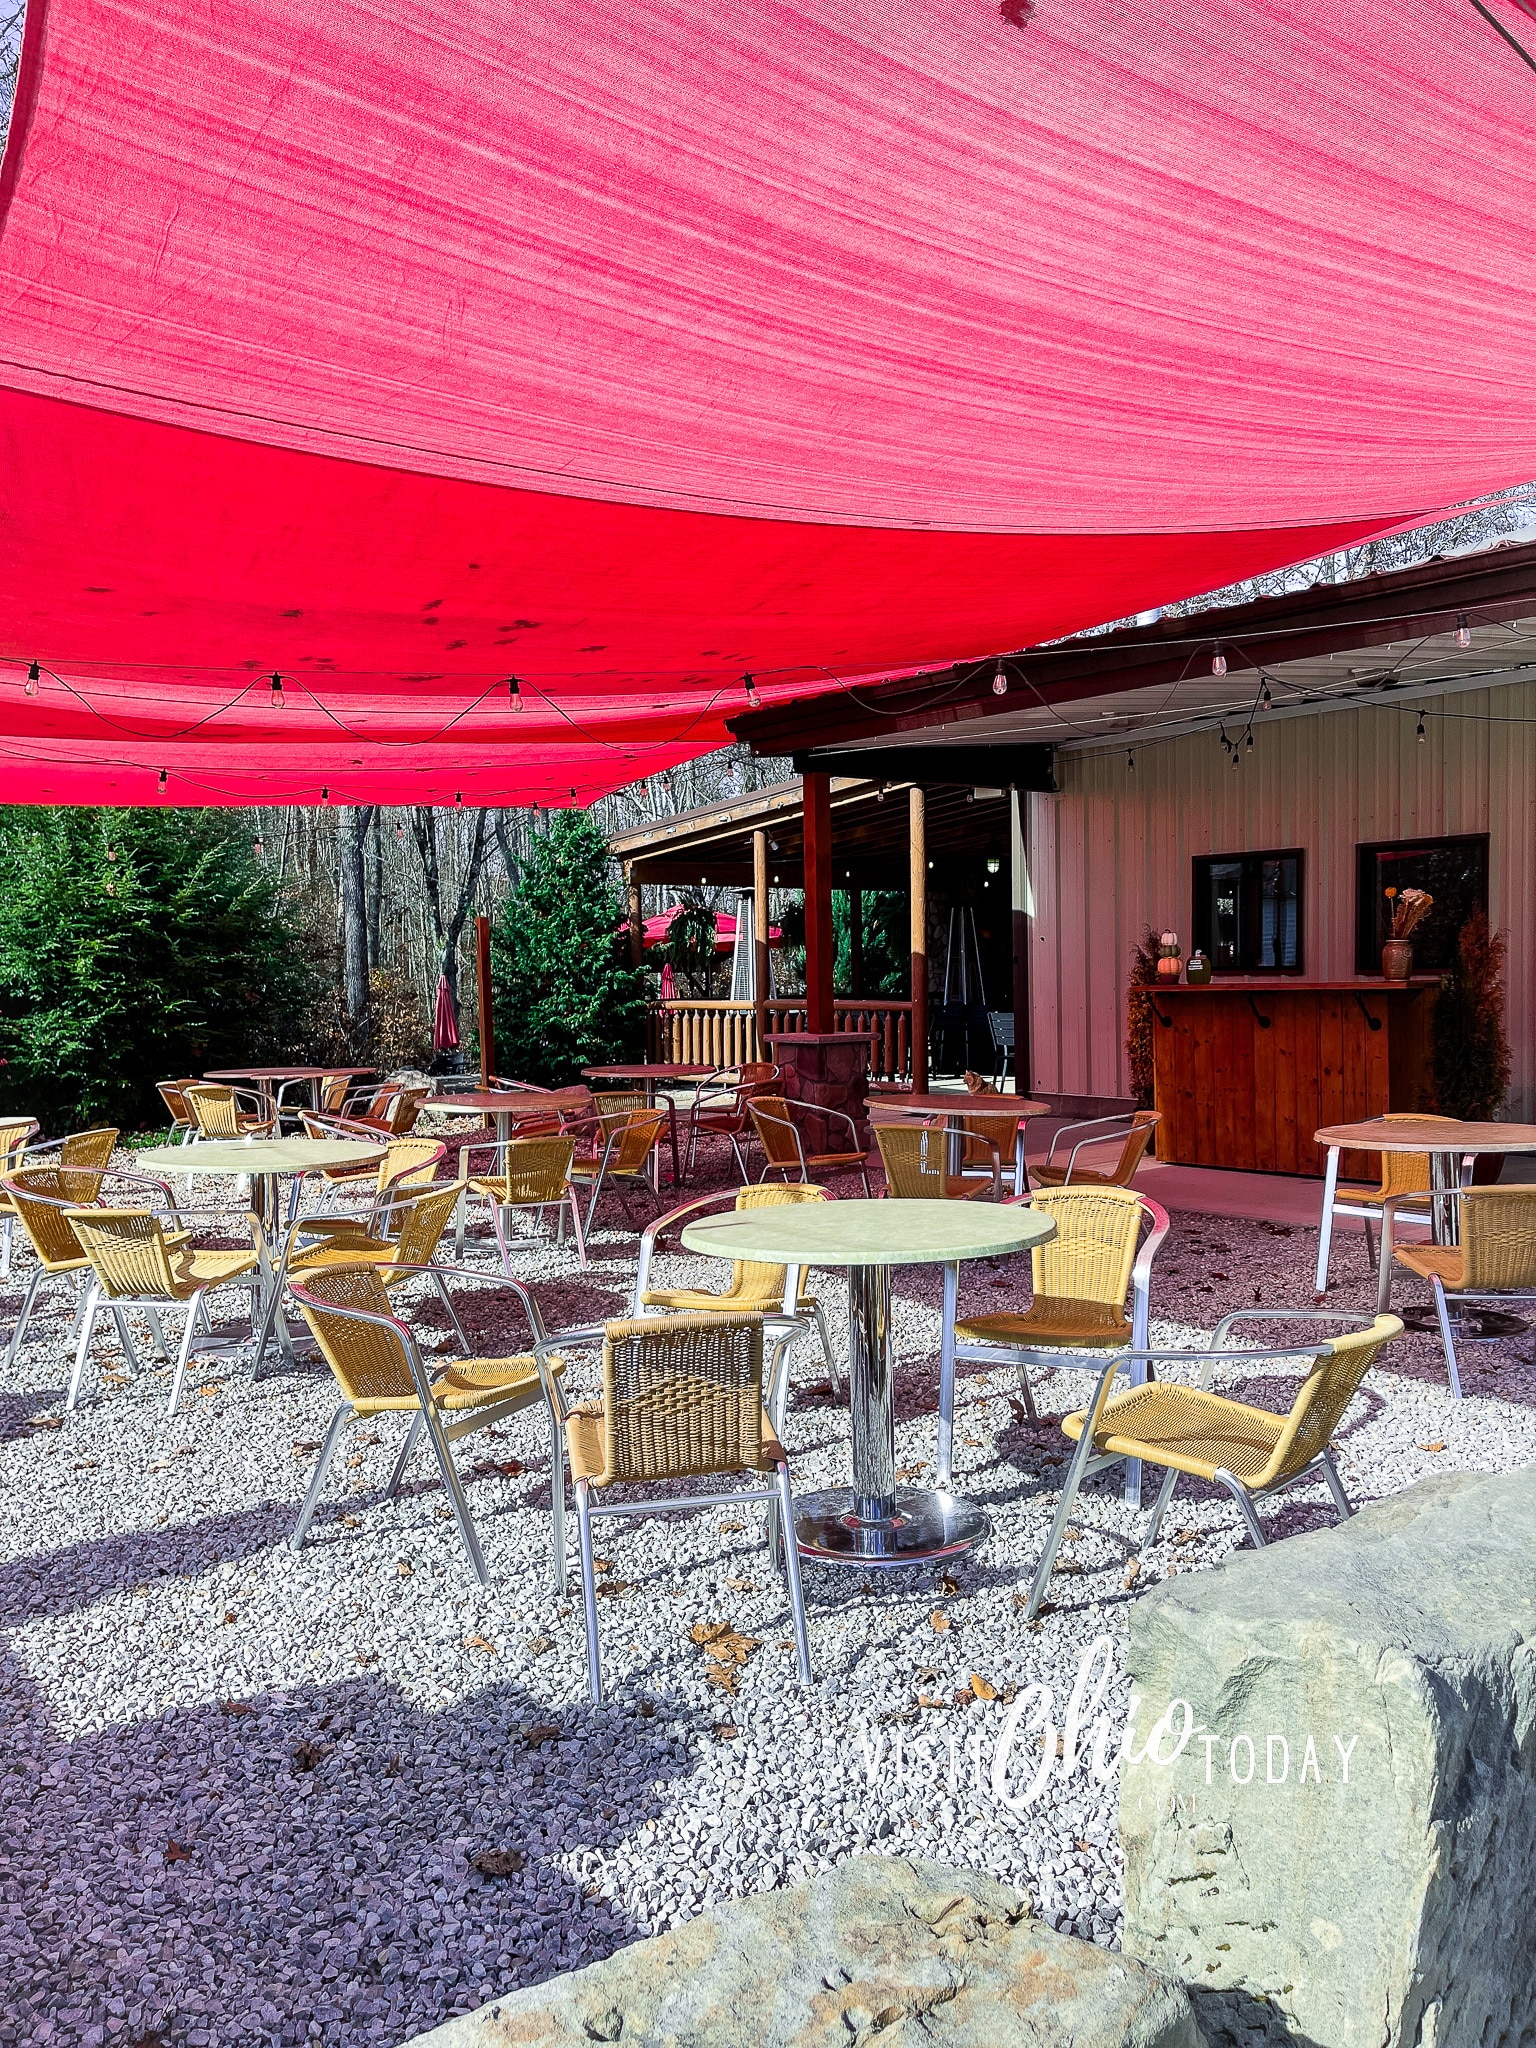 vertical photo of the patio area at Hocking Hills Winery with a red canopy, round tables and wicker chairs. Photo credit: Cindy Gordon of VisitOhioToday.com